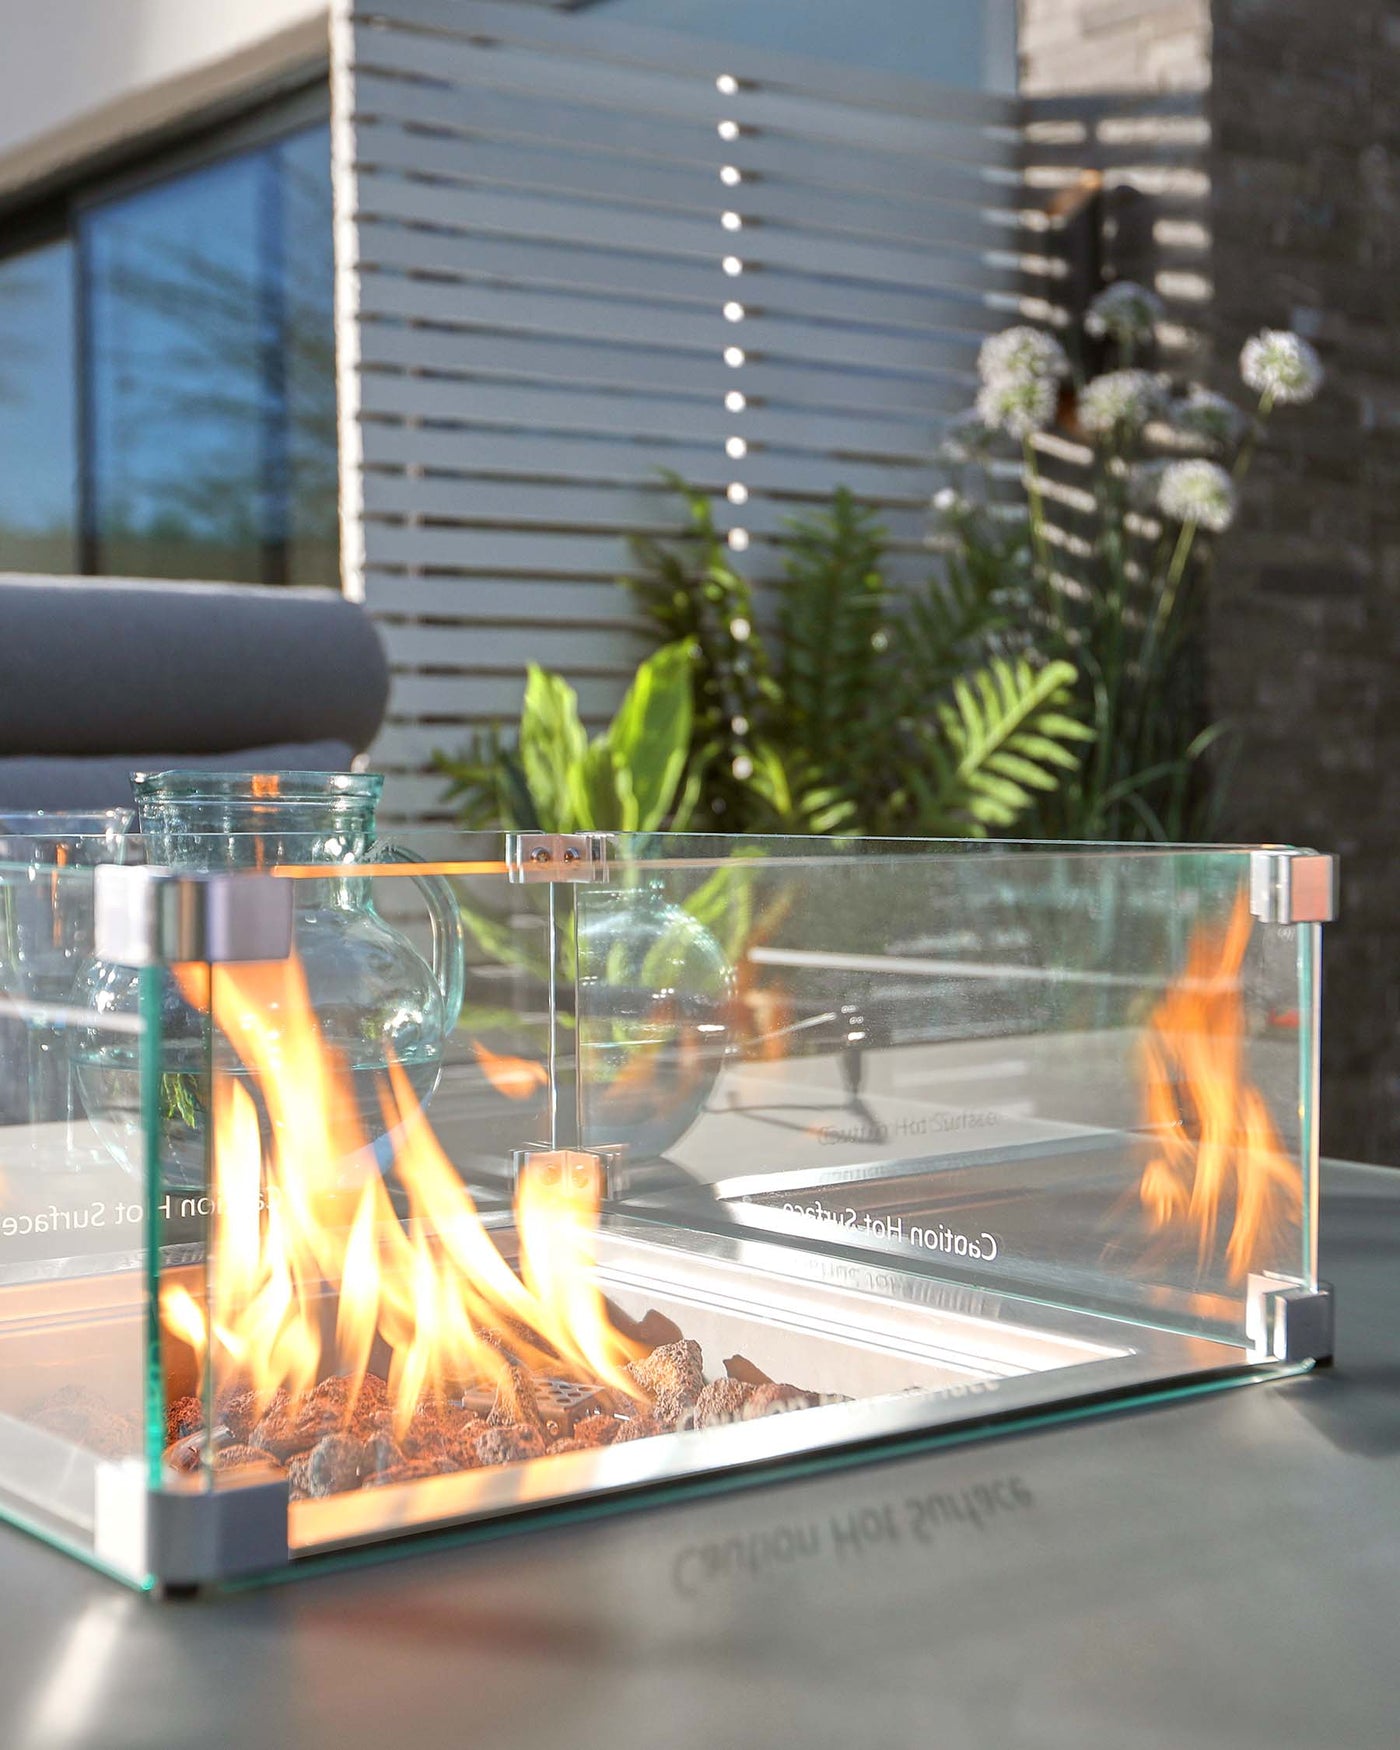 Modern outdoor glass fire pit table featuring a transparent fireproof glass barrier and polished metal corners, with flames burning over a bed of ornamental rocks. Visible in the blurred background is a sleek, contemporary patio setting with comfortable cushioned chairs and architectural features suggesting a high-end, minimalist design aesthetic.